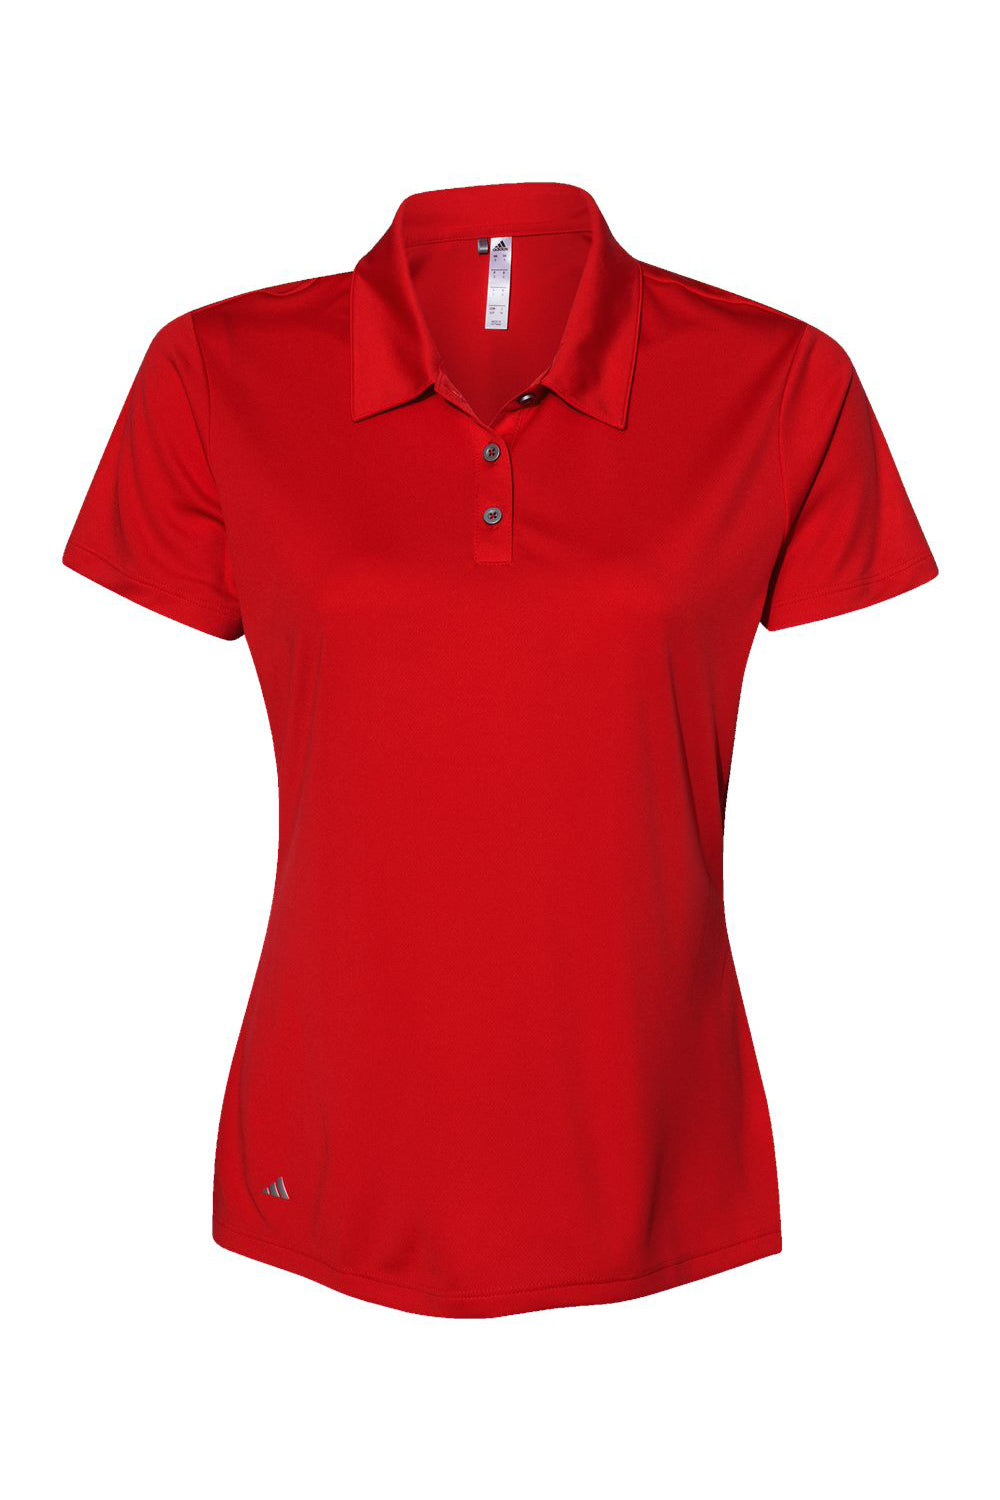 Adidas A231 Womens Performance Short Sleeve Polo Shirt Collegiate Red Flat Front